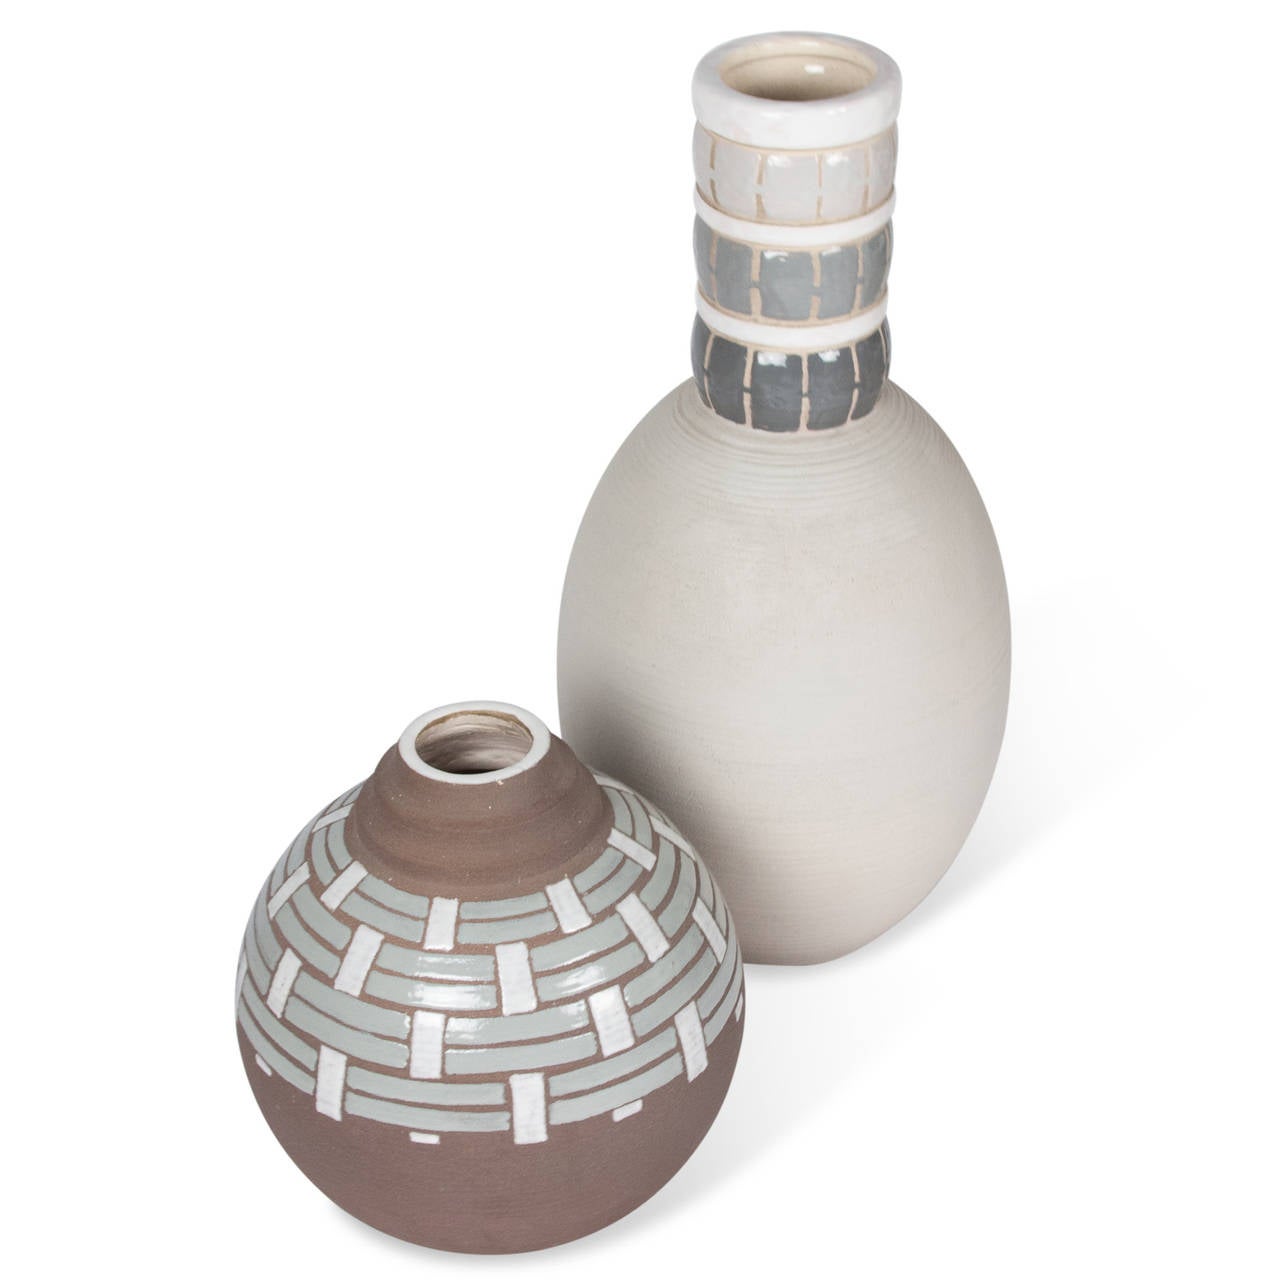 Two ceramic vases decorated with enamel strips in various shades of grey. By Luc Lanel, French, 1930s. Signed to underside.

On right: Off-white/grey ovoid vase with long neck: 17 1/2 in. H, 9 in. diameter.
On left: Rounded brown glazed vase with